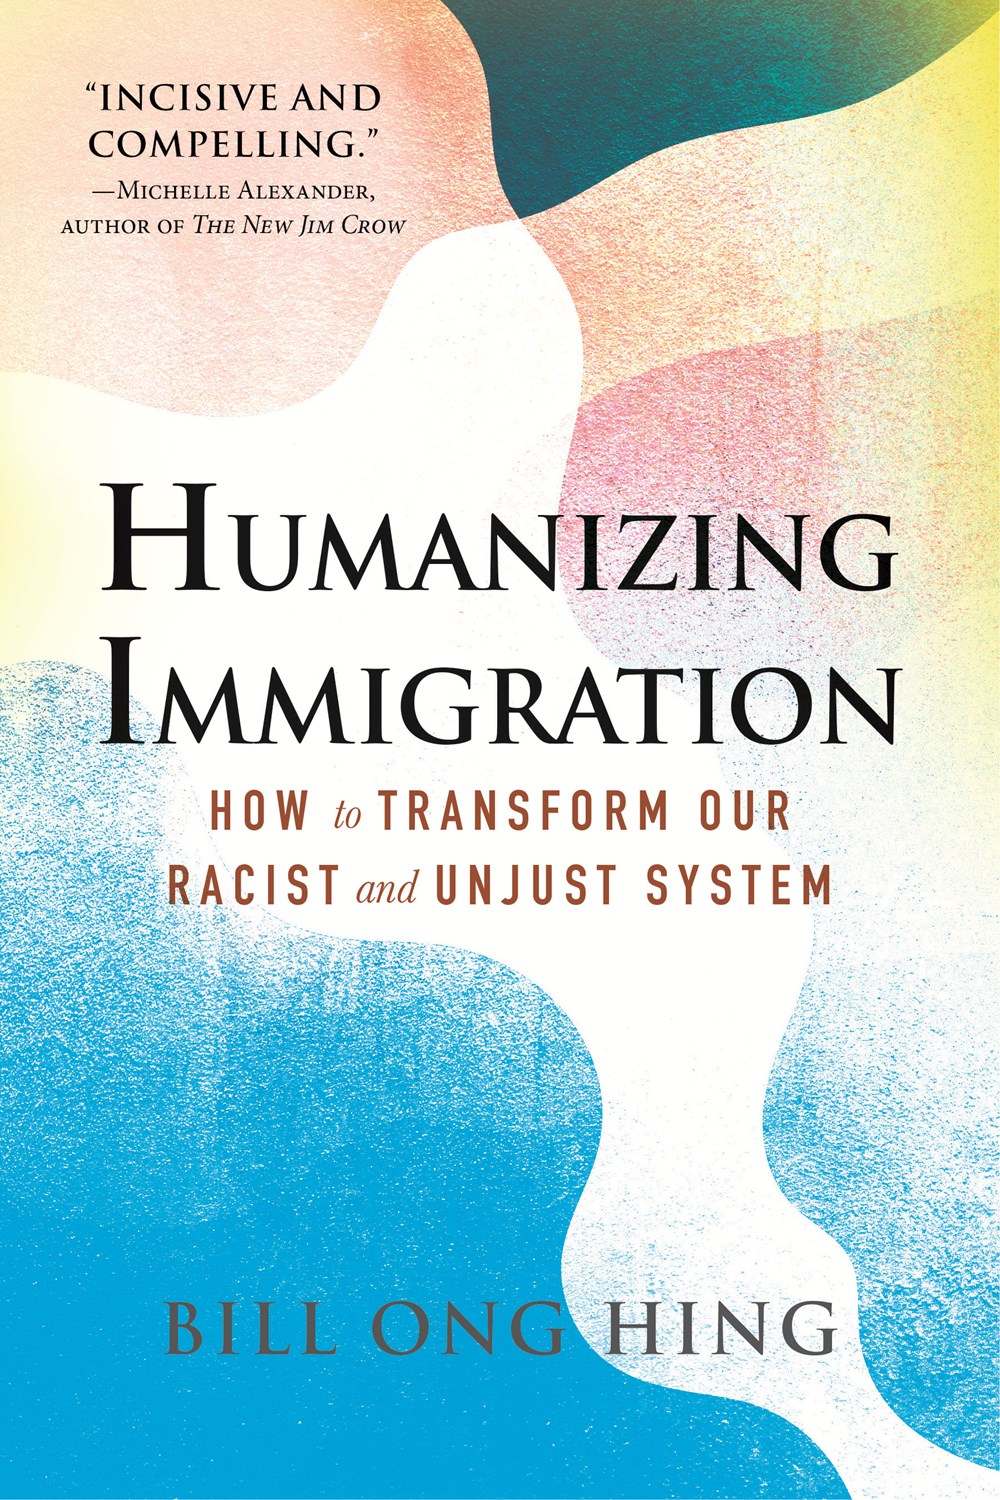 Humanizing Immigration: How To Transform Our Racist and Unjust System